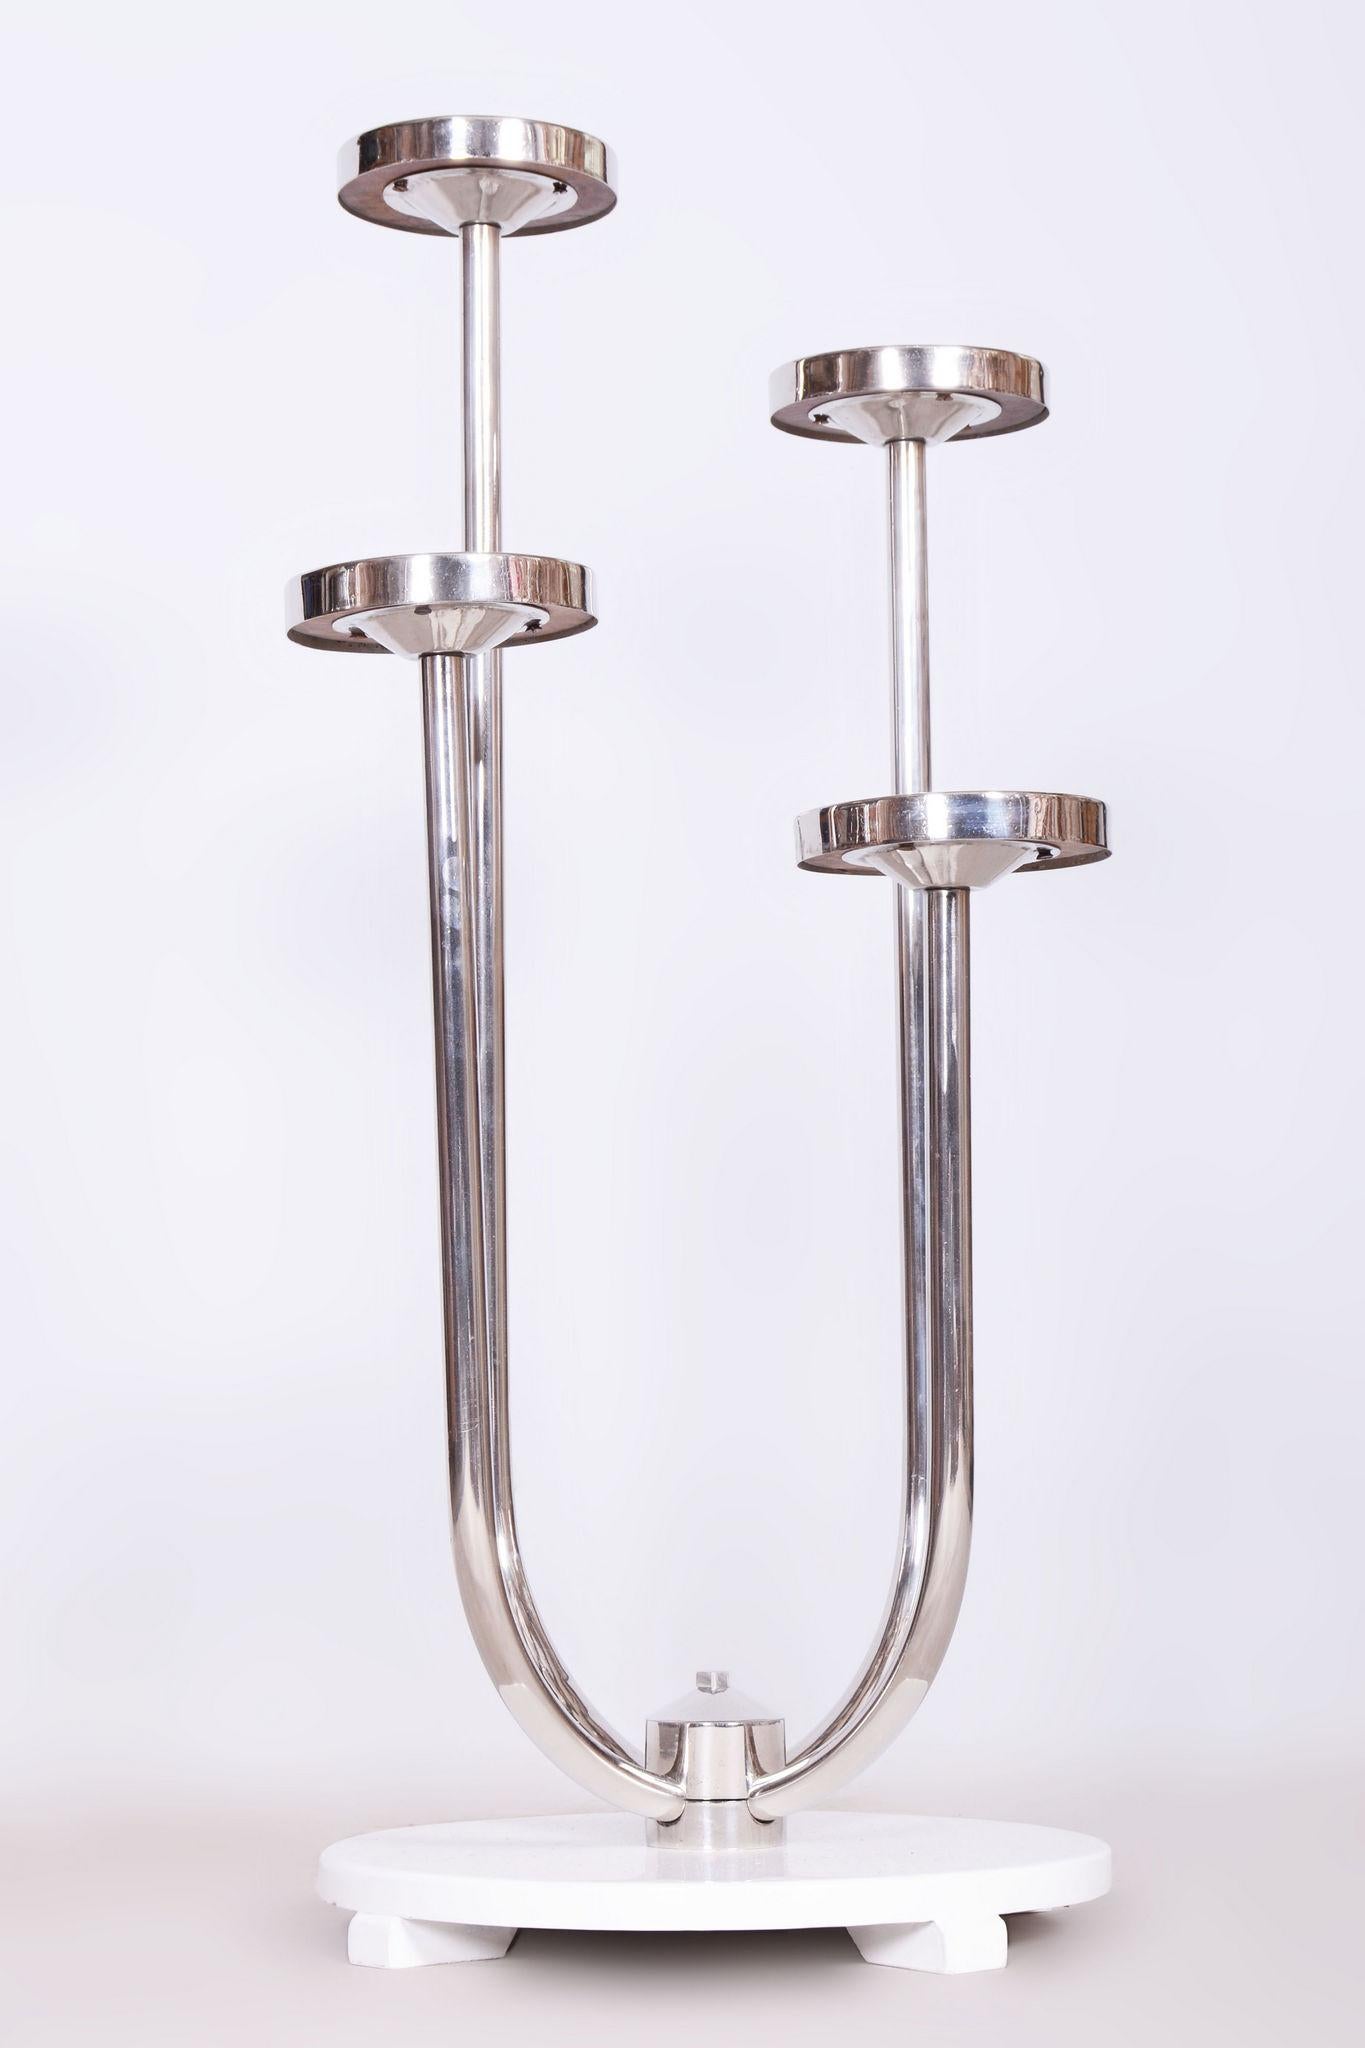 Restored Bauhaus Flower Stand, Vichr a spol, Chrome-plated Steel, Czechia, 1930s For Sale 1